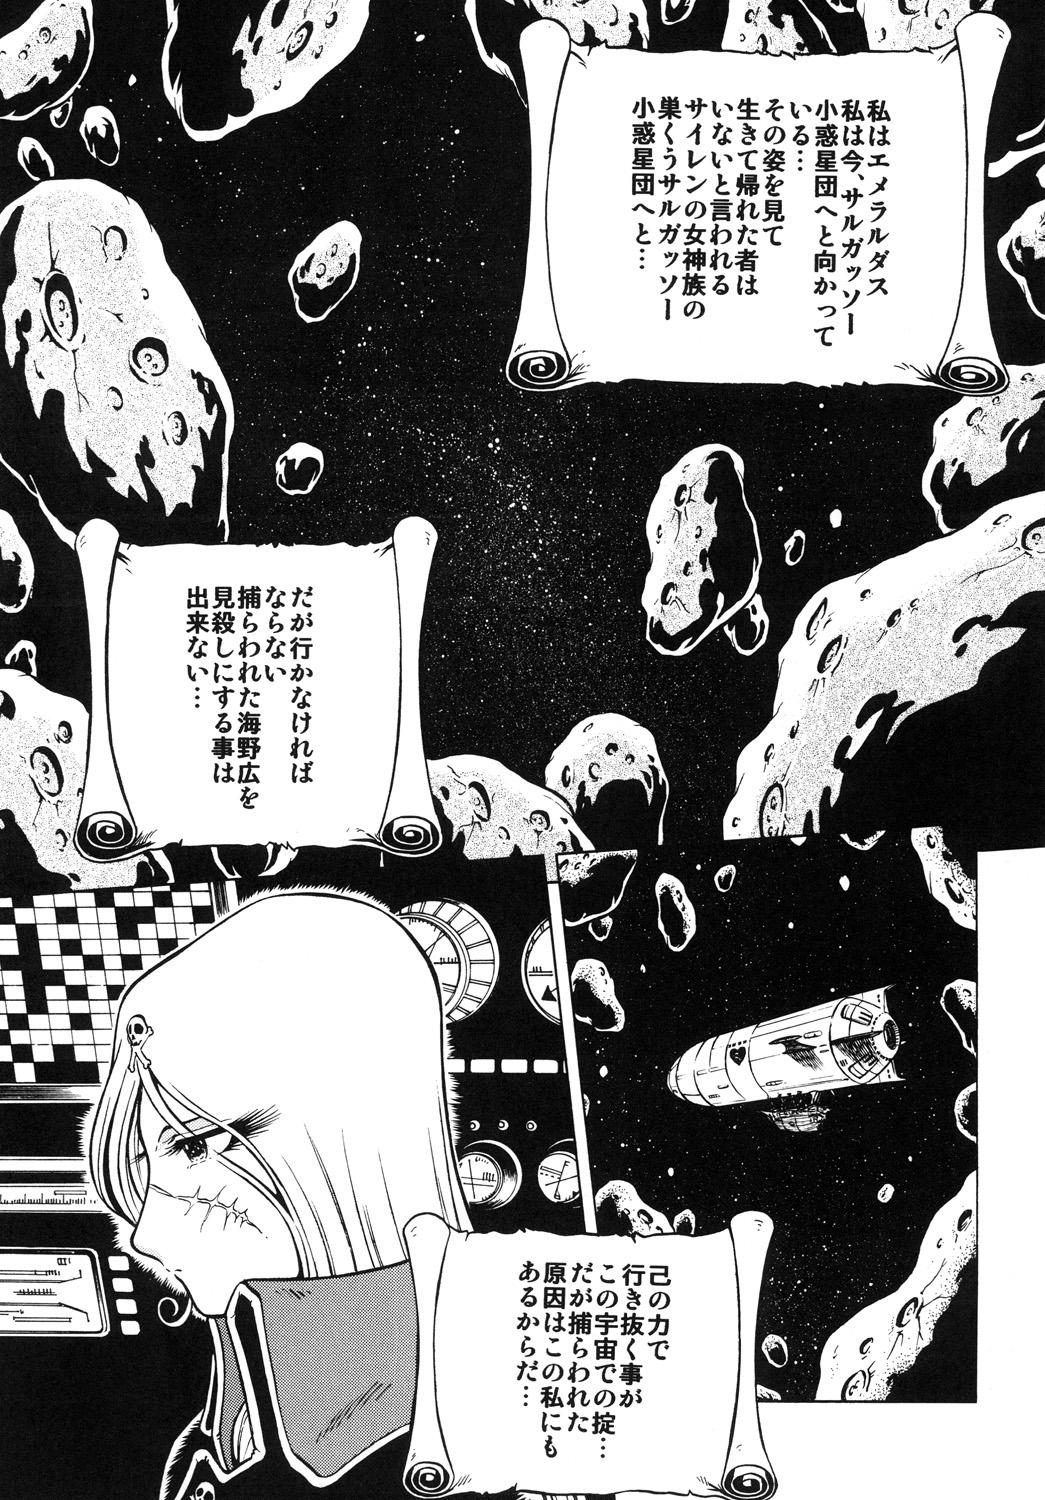 Pussy Fingering NightHead+2 - Space pirate captain harlock Playing - Page 4